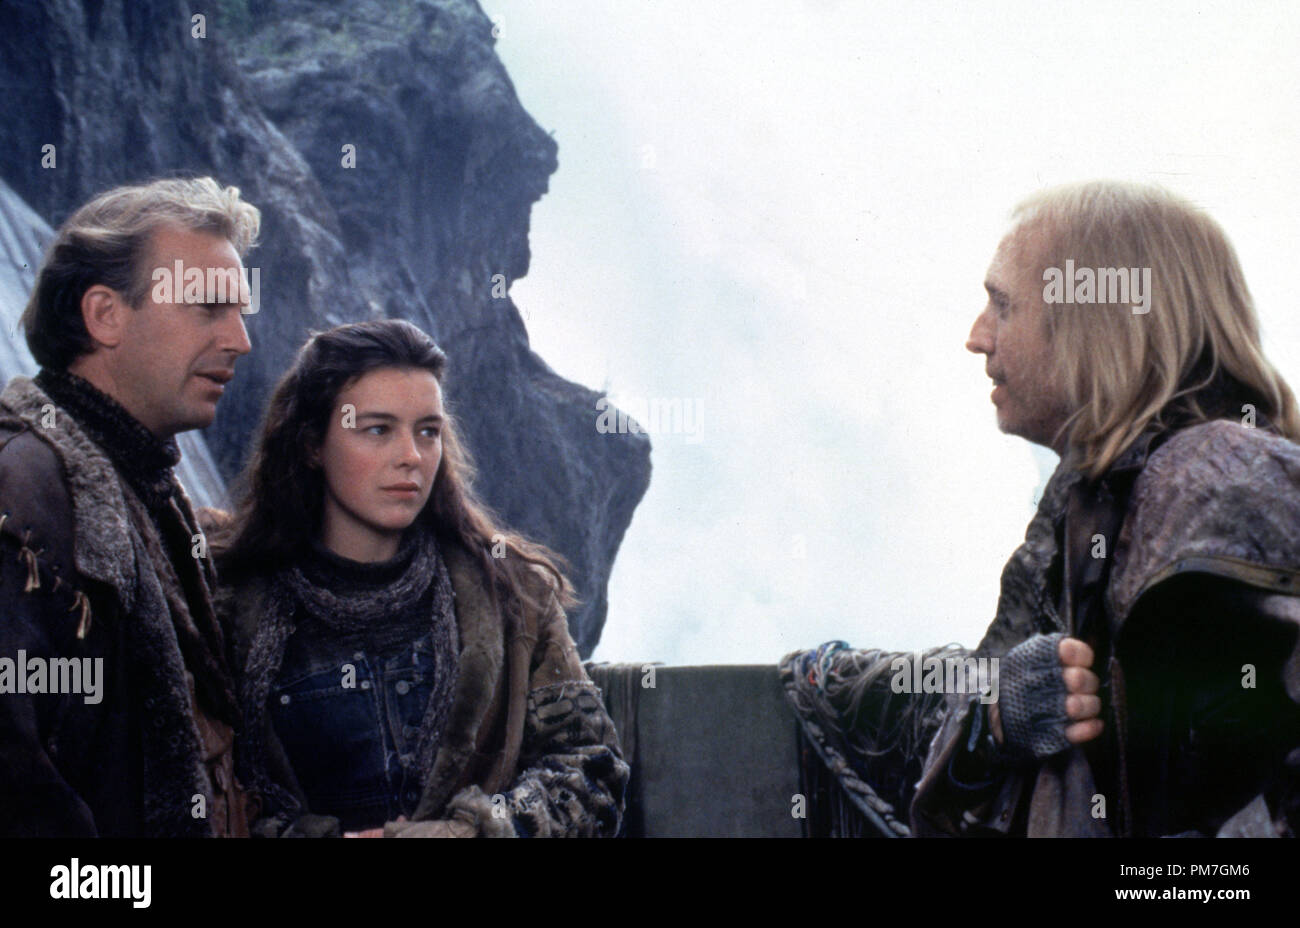 Film Still from "The Postman" Kevin Costner, Olivia Williams, Tom Petty ©  1997 Warner Photo Credit: Ben Glass File Reference # 31013053THA For  Editorial Use Only - All Rights Reserved Stock Photo - Alamy